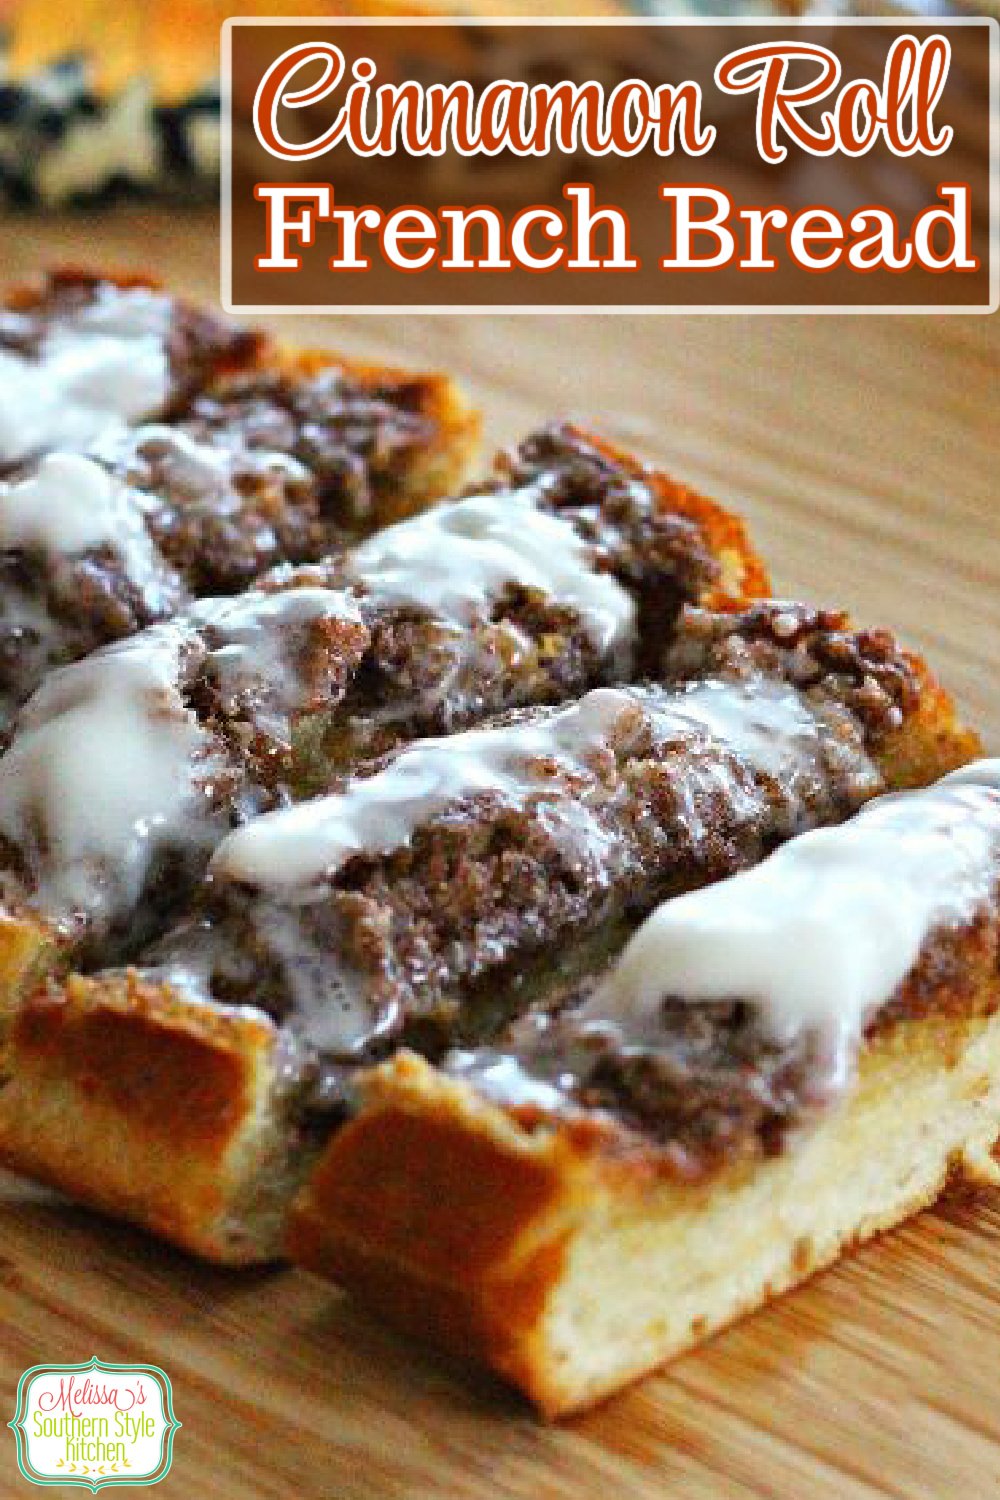 Turn one of those inexpensive loaves of bread from your local grocery store into this million dollar Cinnamon Roll French Bread #cinnamonrollbread #cinnamonrolls #bread #frenchbread #rolls #brunch #breakfast #breadrecipes #southernfood #southernrecipes #easyrecipes #cinnamon via @melissasssk